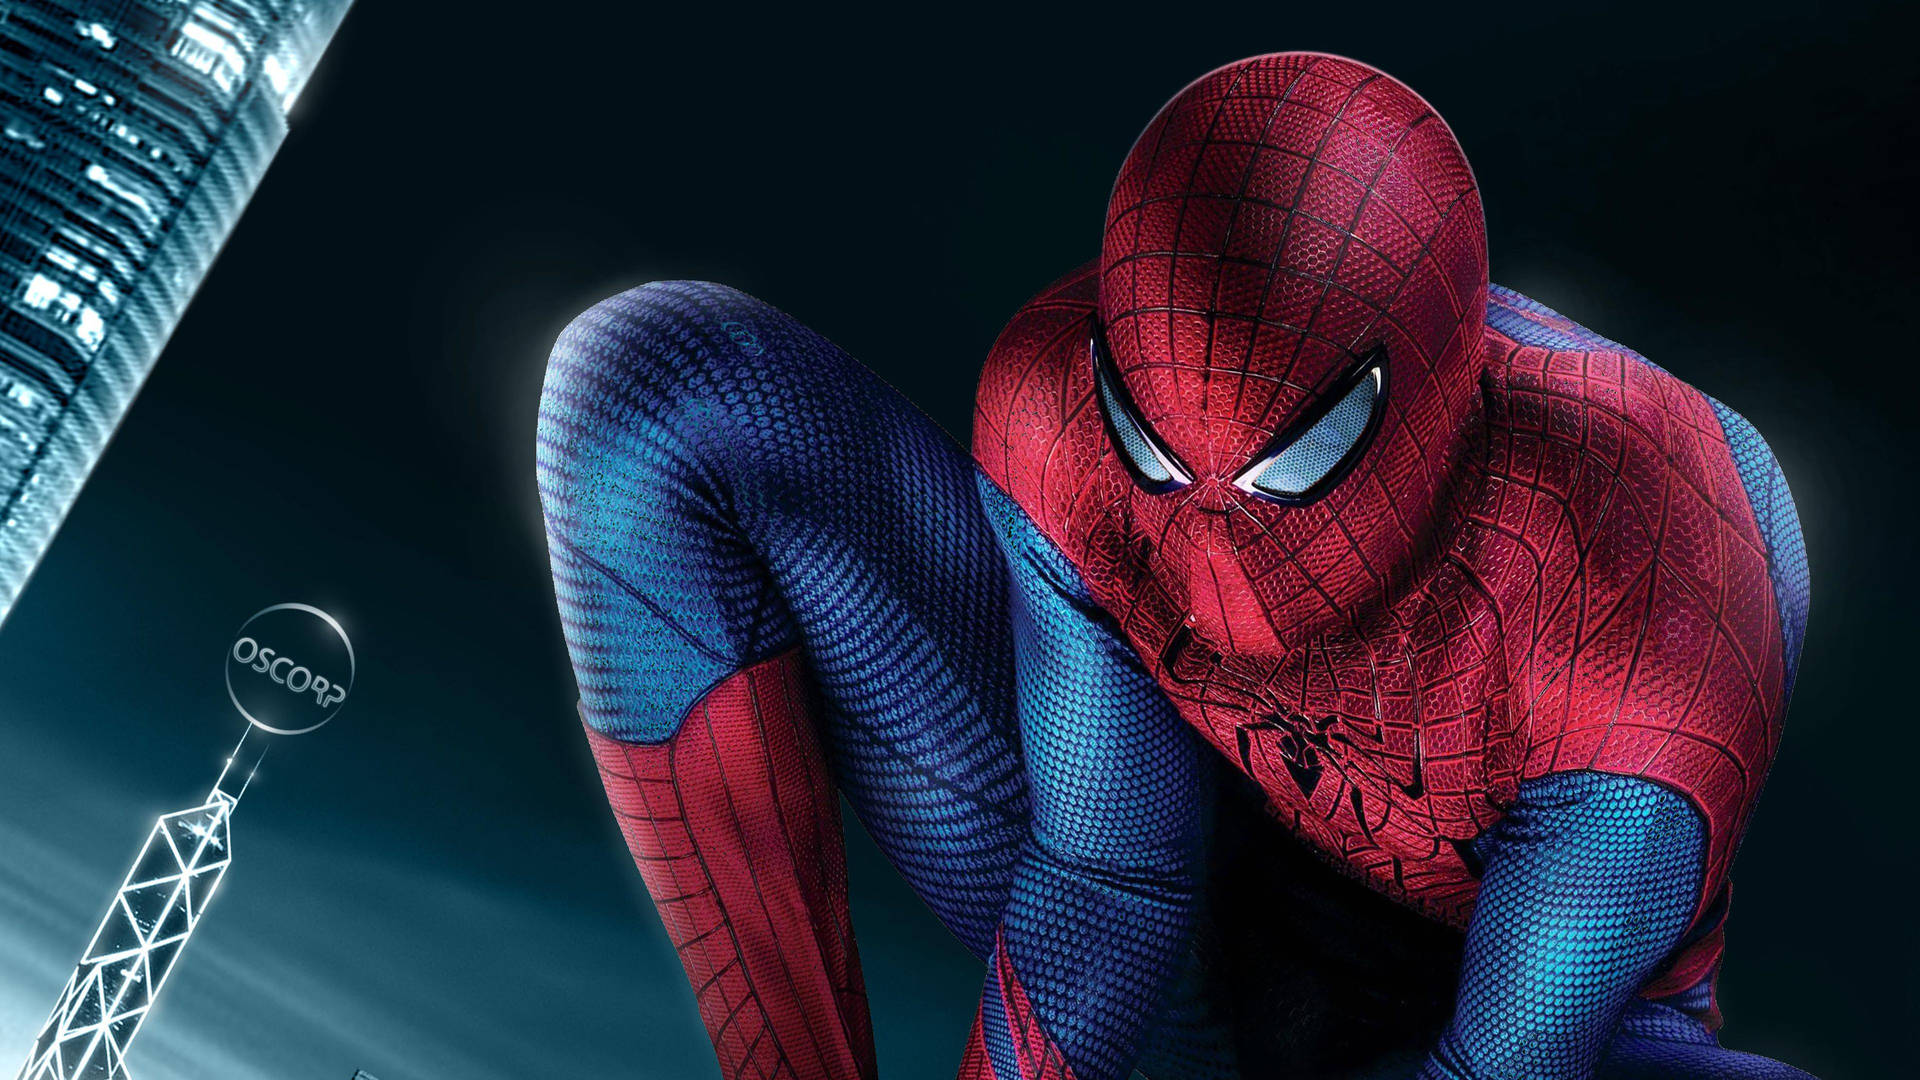 Prepare to be amazed by “The Amazing Spider-Man!” Wallpaper